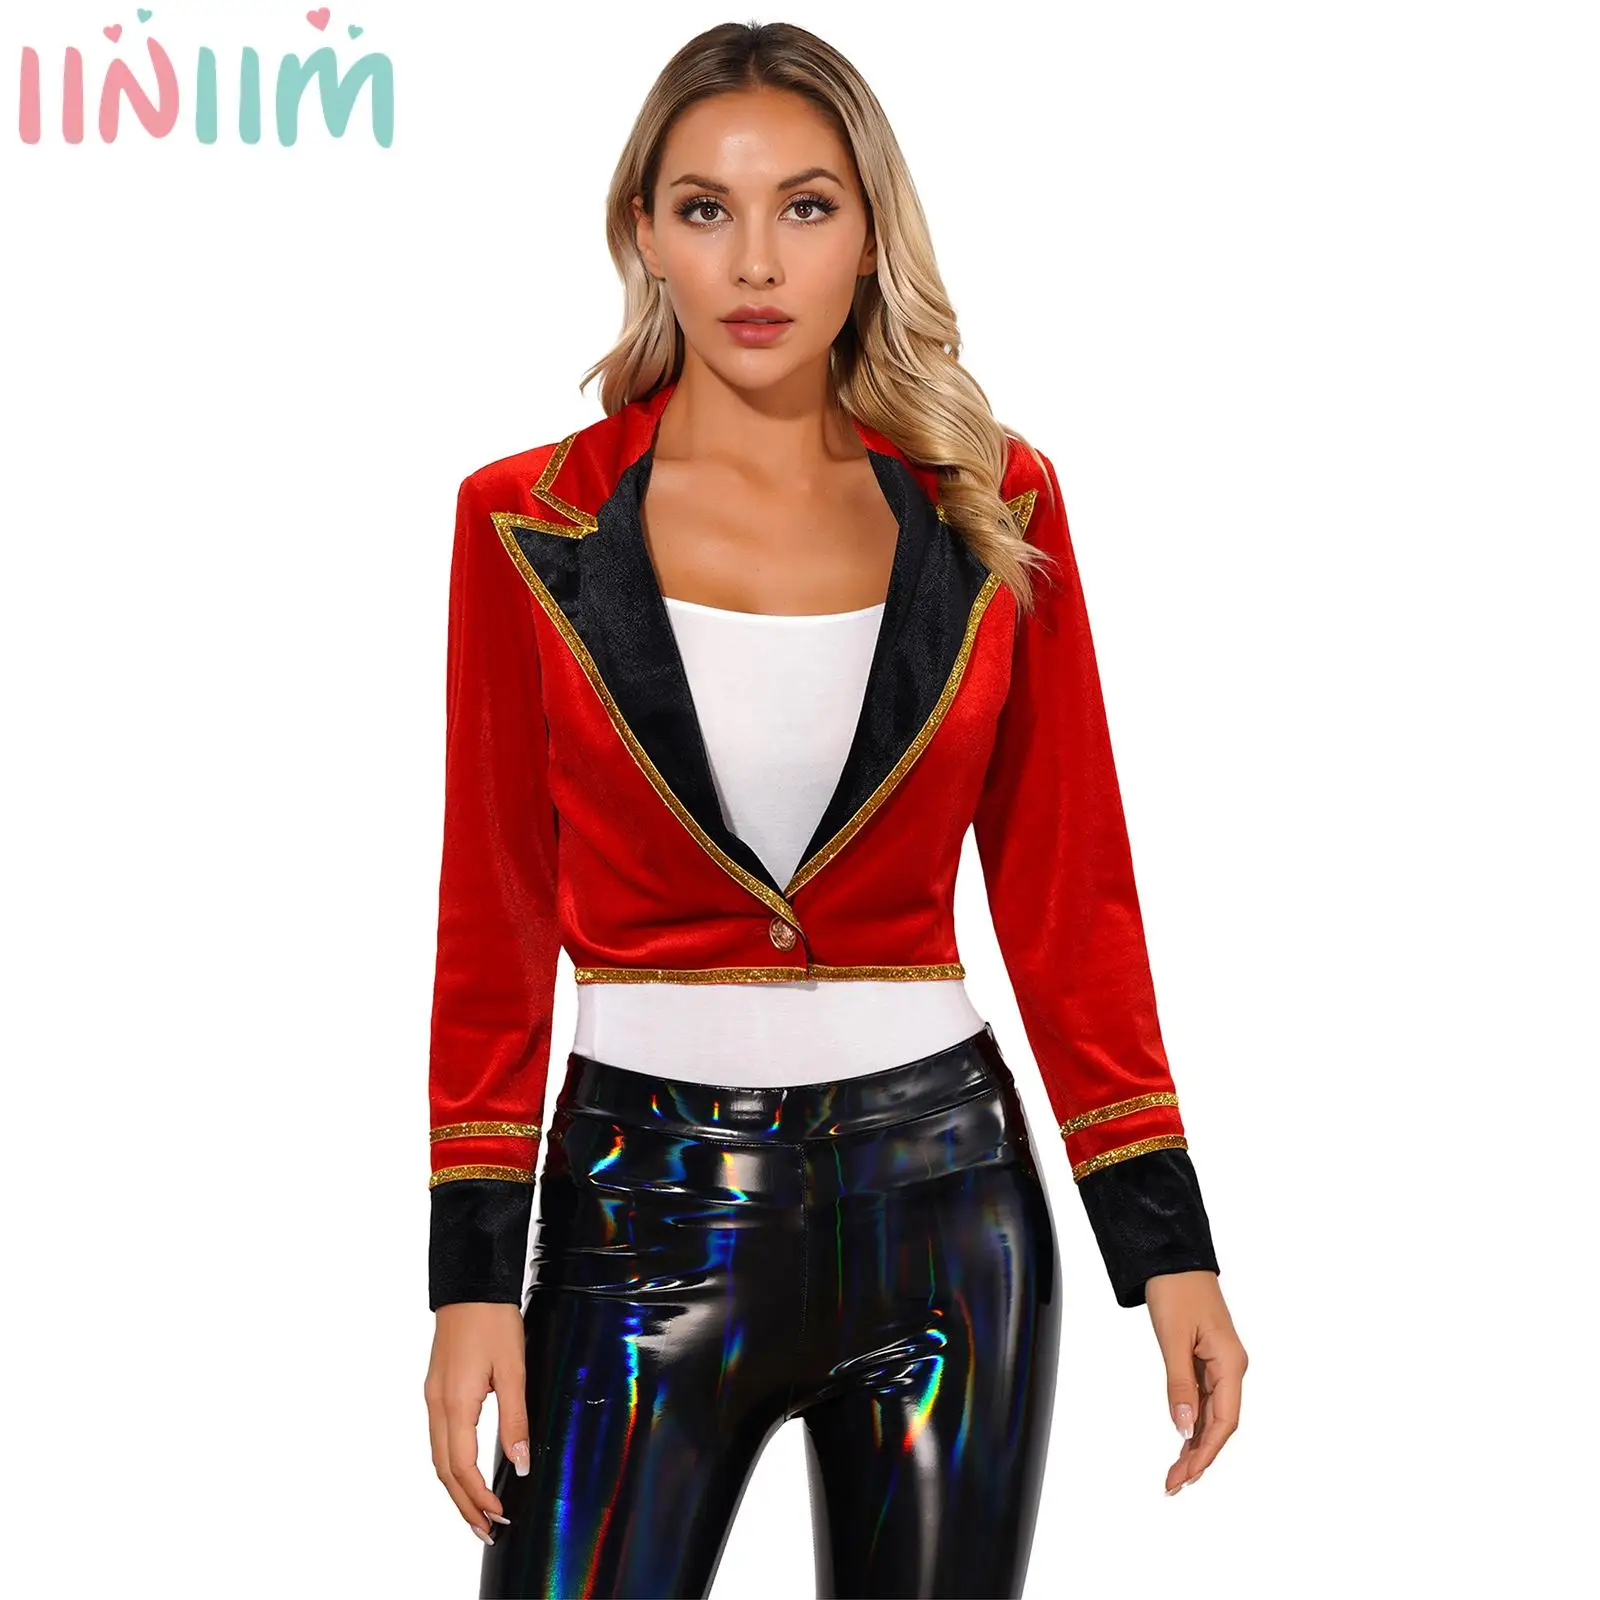 

Womens Circus Ringmaster Costume Showman Ringleader Lion Tamer Tailcoat Jacket Blazer for Halloween Cosplay Party Dress Up